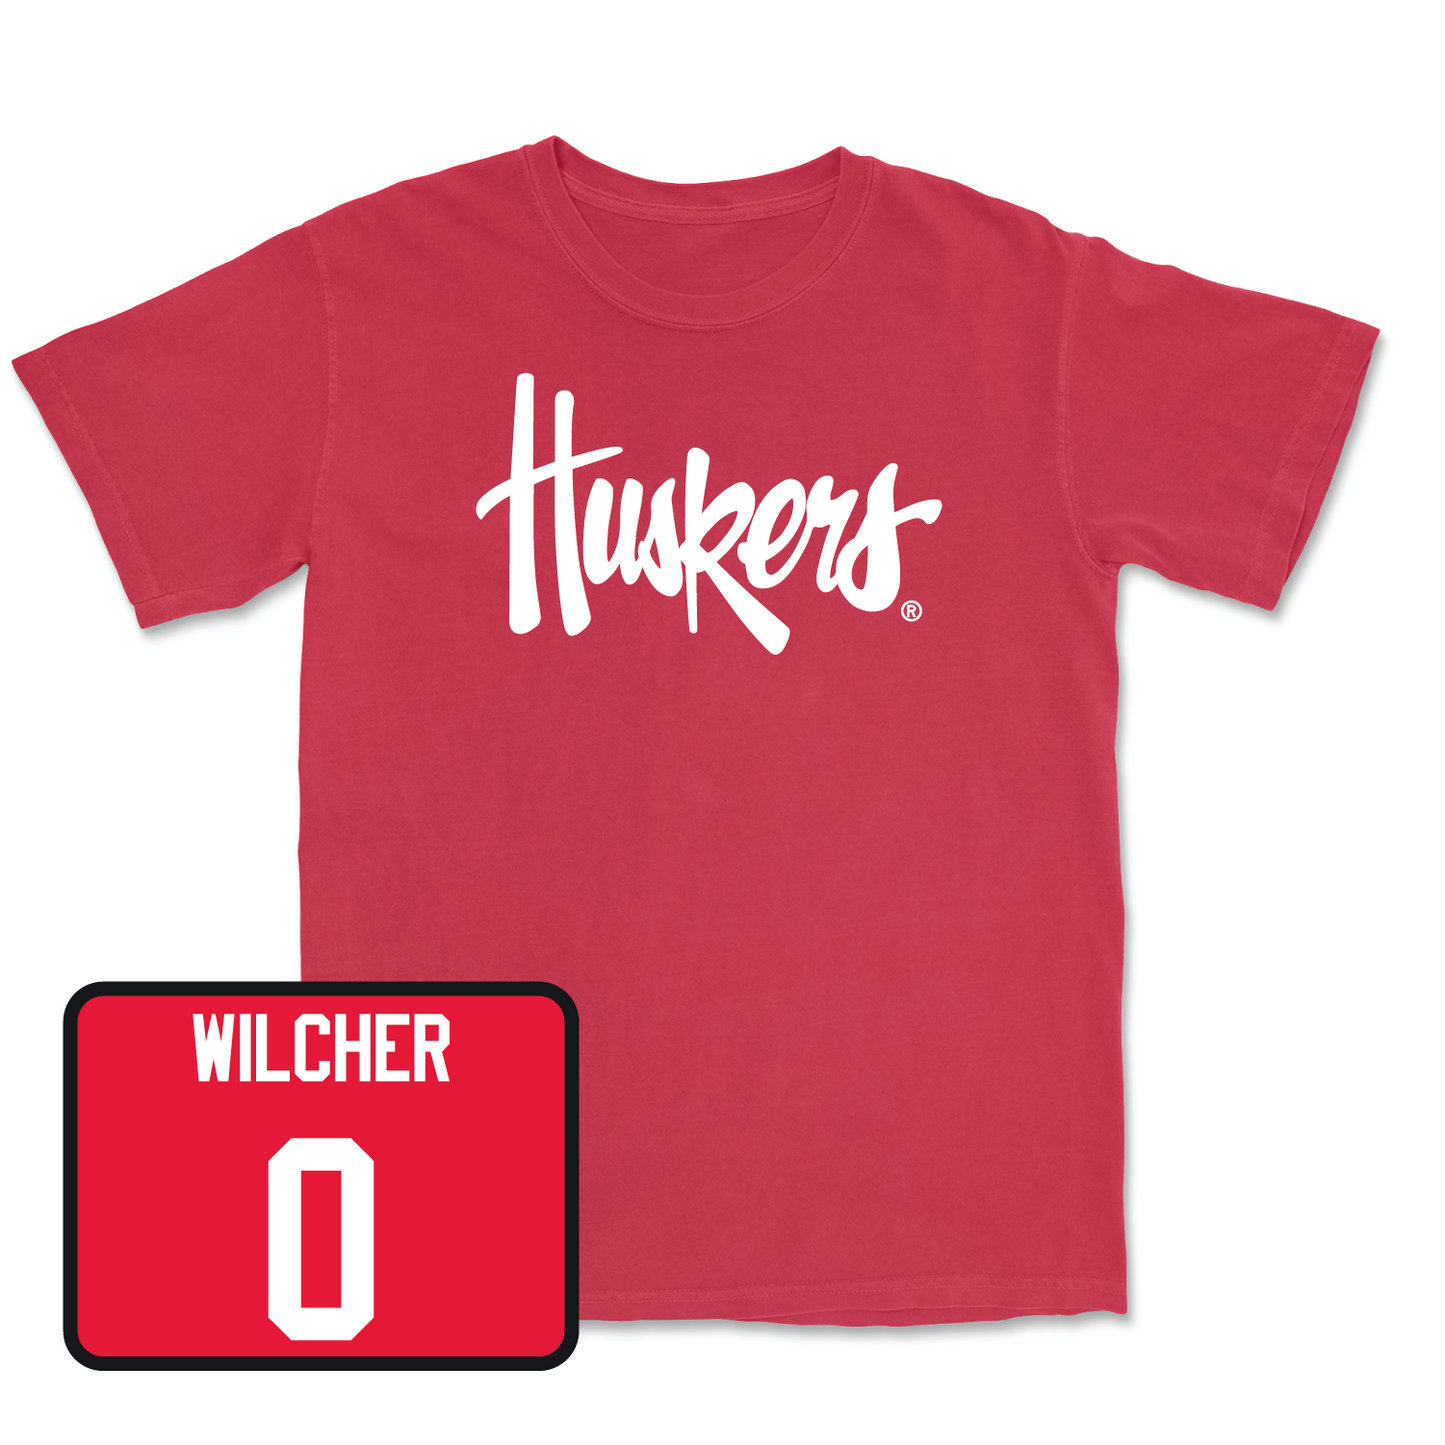 Red Men's Basketball Huskers Tee Youth Small / C.J. Wilcher | #0